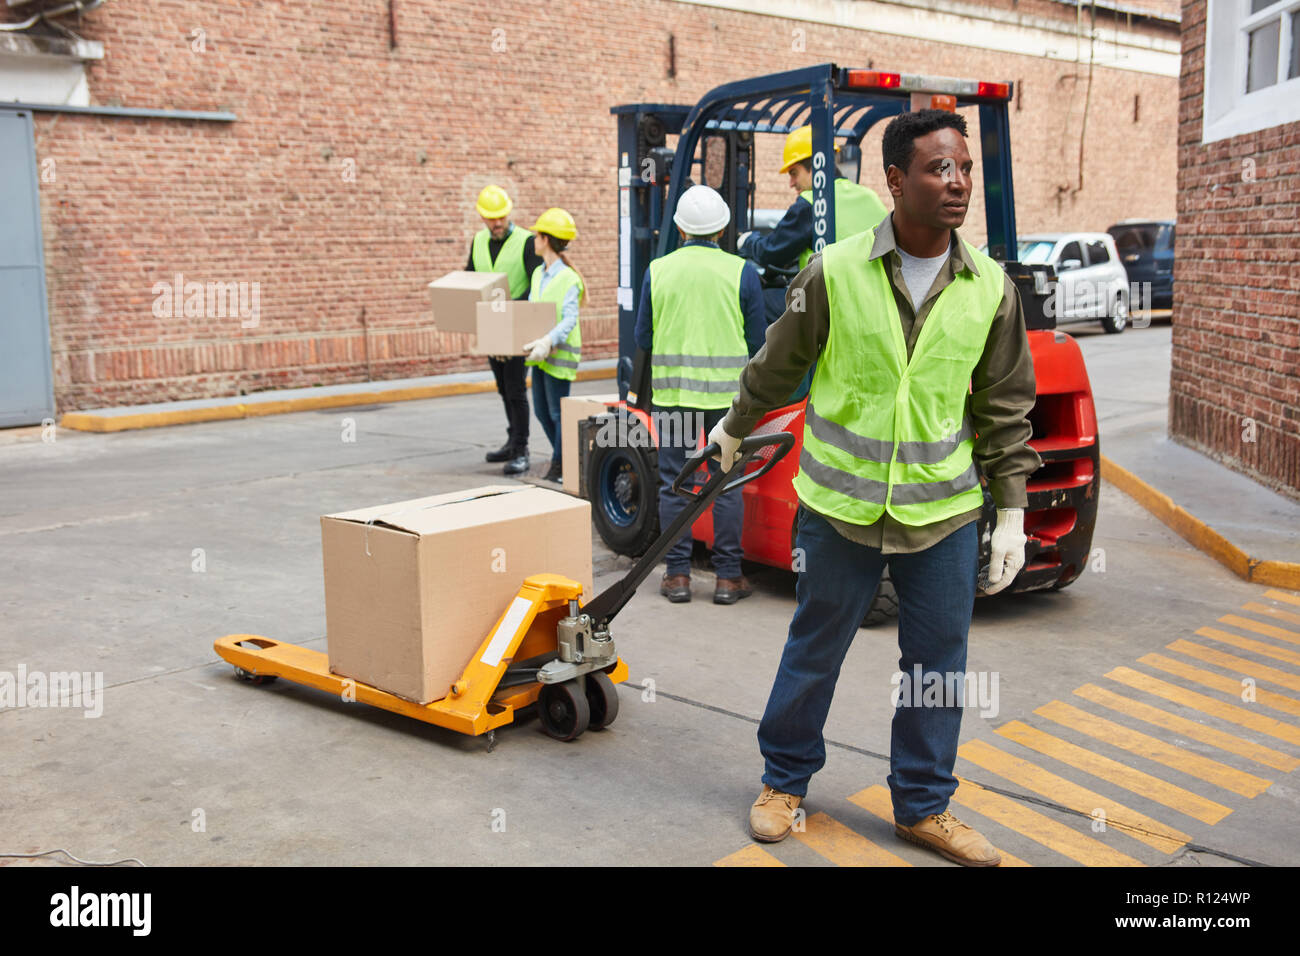 African worker in front of the logistics center with package on the pallet truck Stock Photo